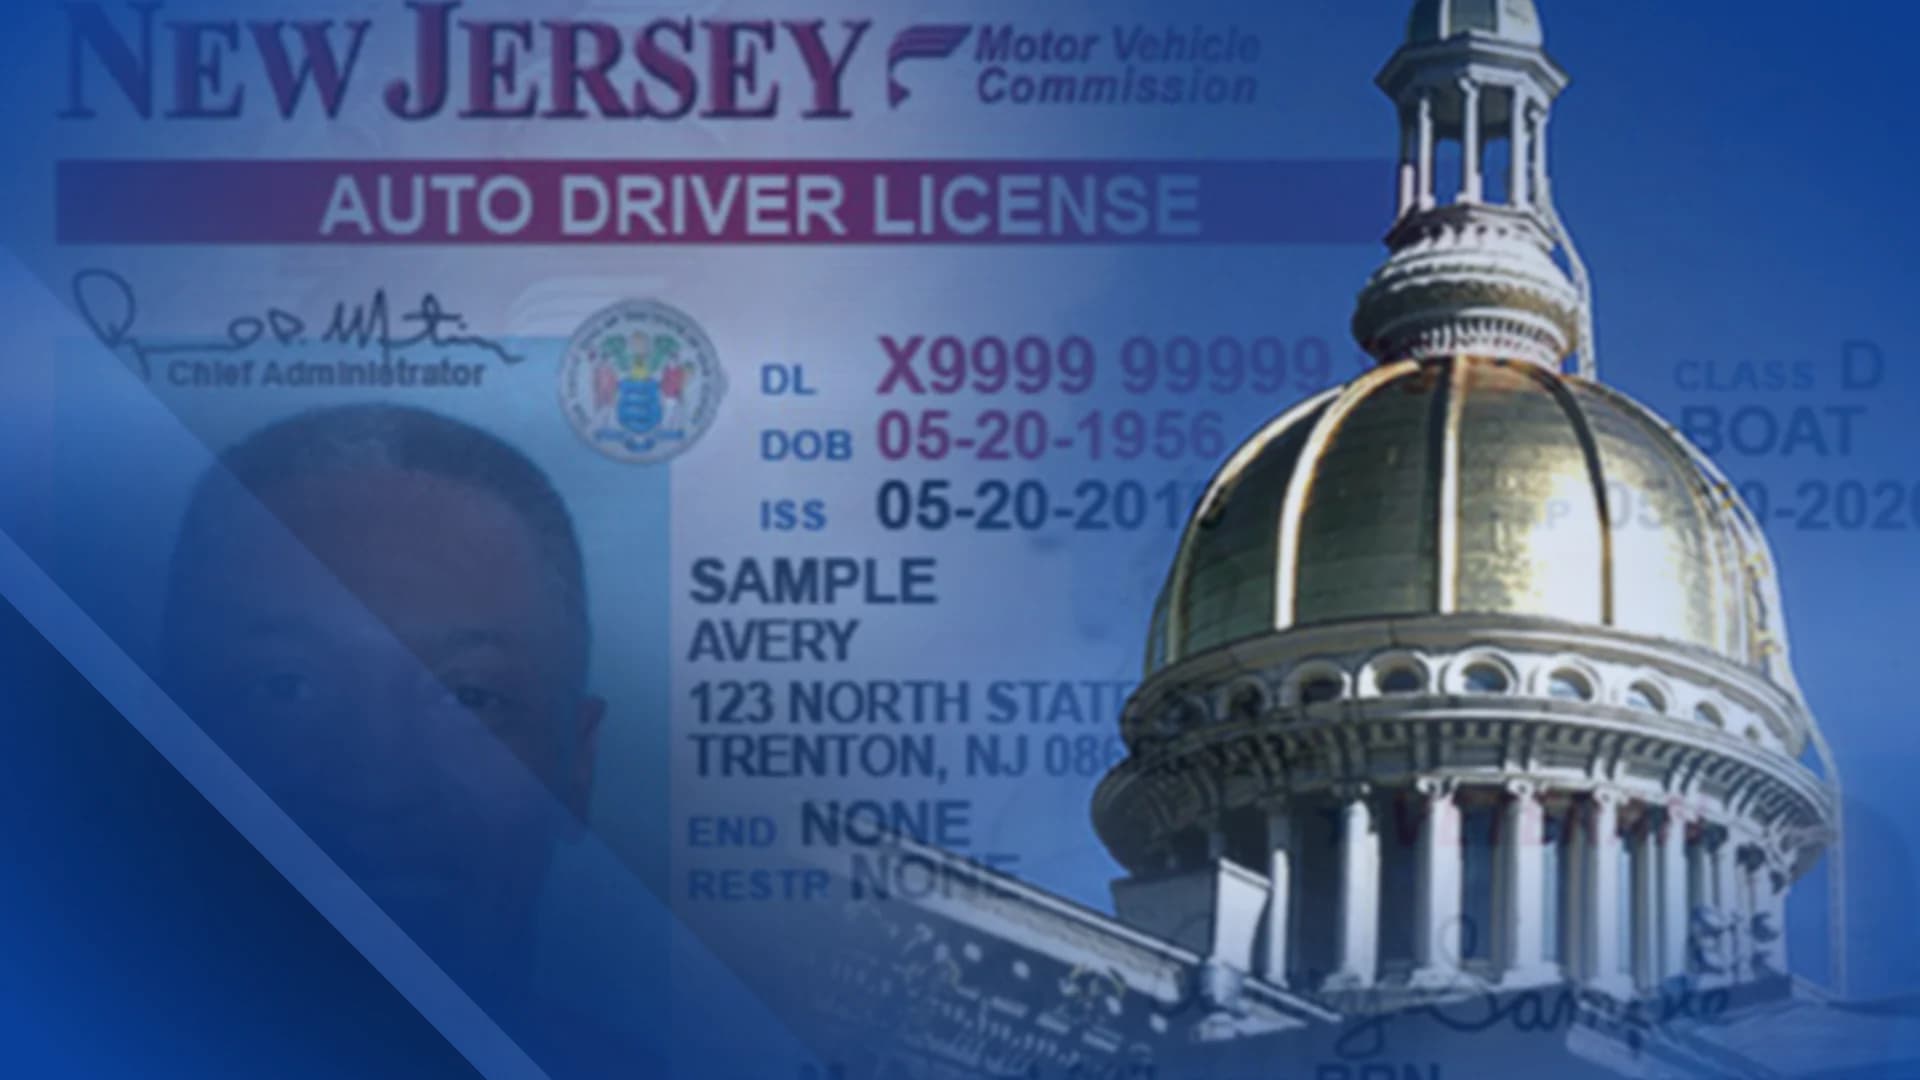 Undocumented immigrants can apply for NJ driver's licenses starting May 1